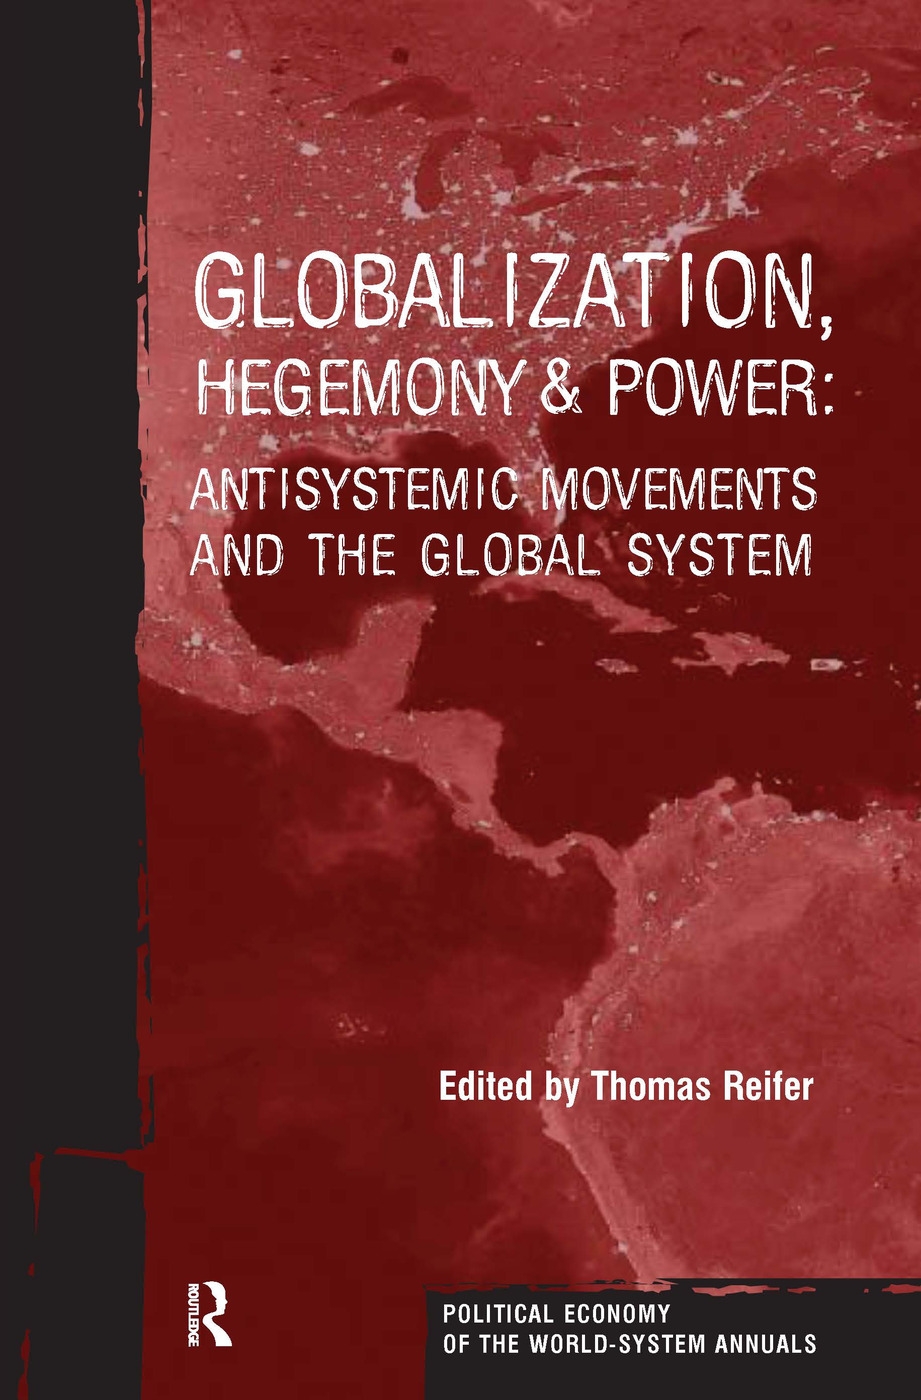 Globalization, Hegemony and Power: Antisystemic Movements and the Global System